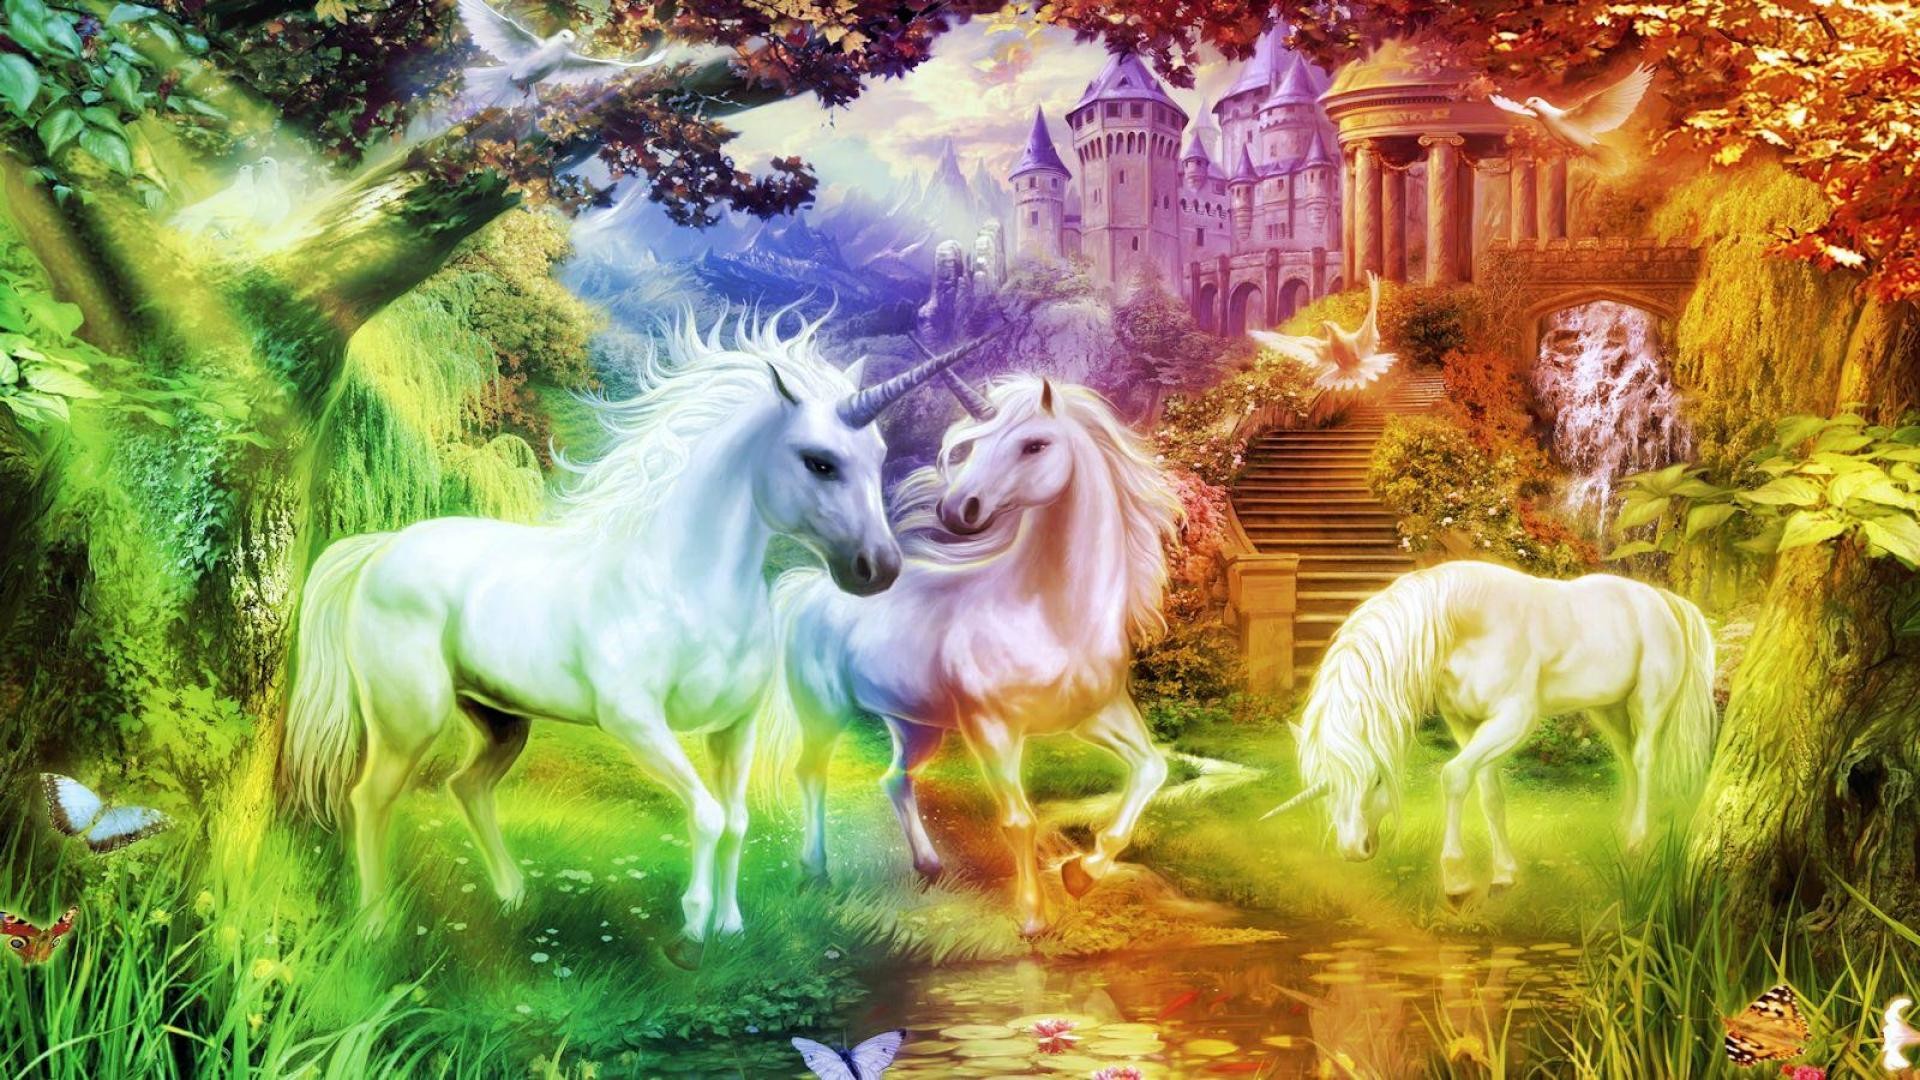 1920x1080 ... Wallpapers 39 Top Selection of Unicorn Wallpaper ...